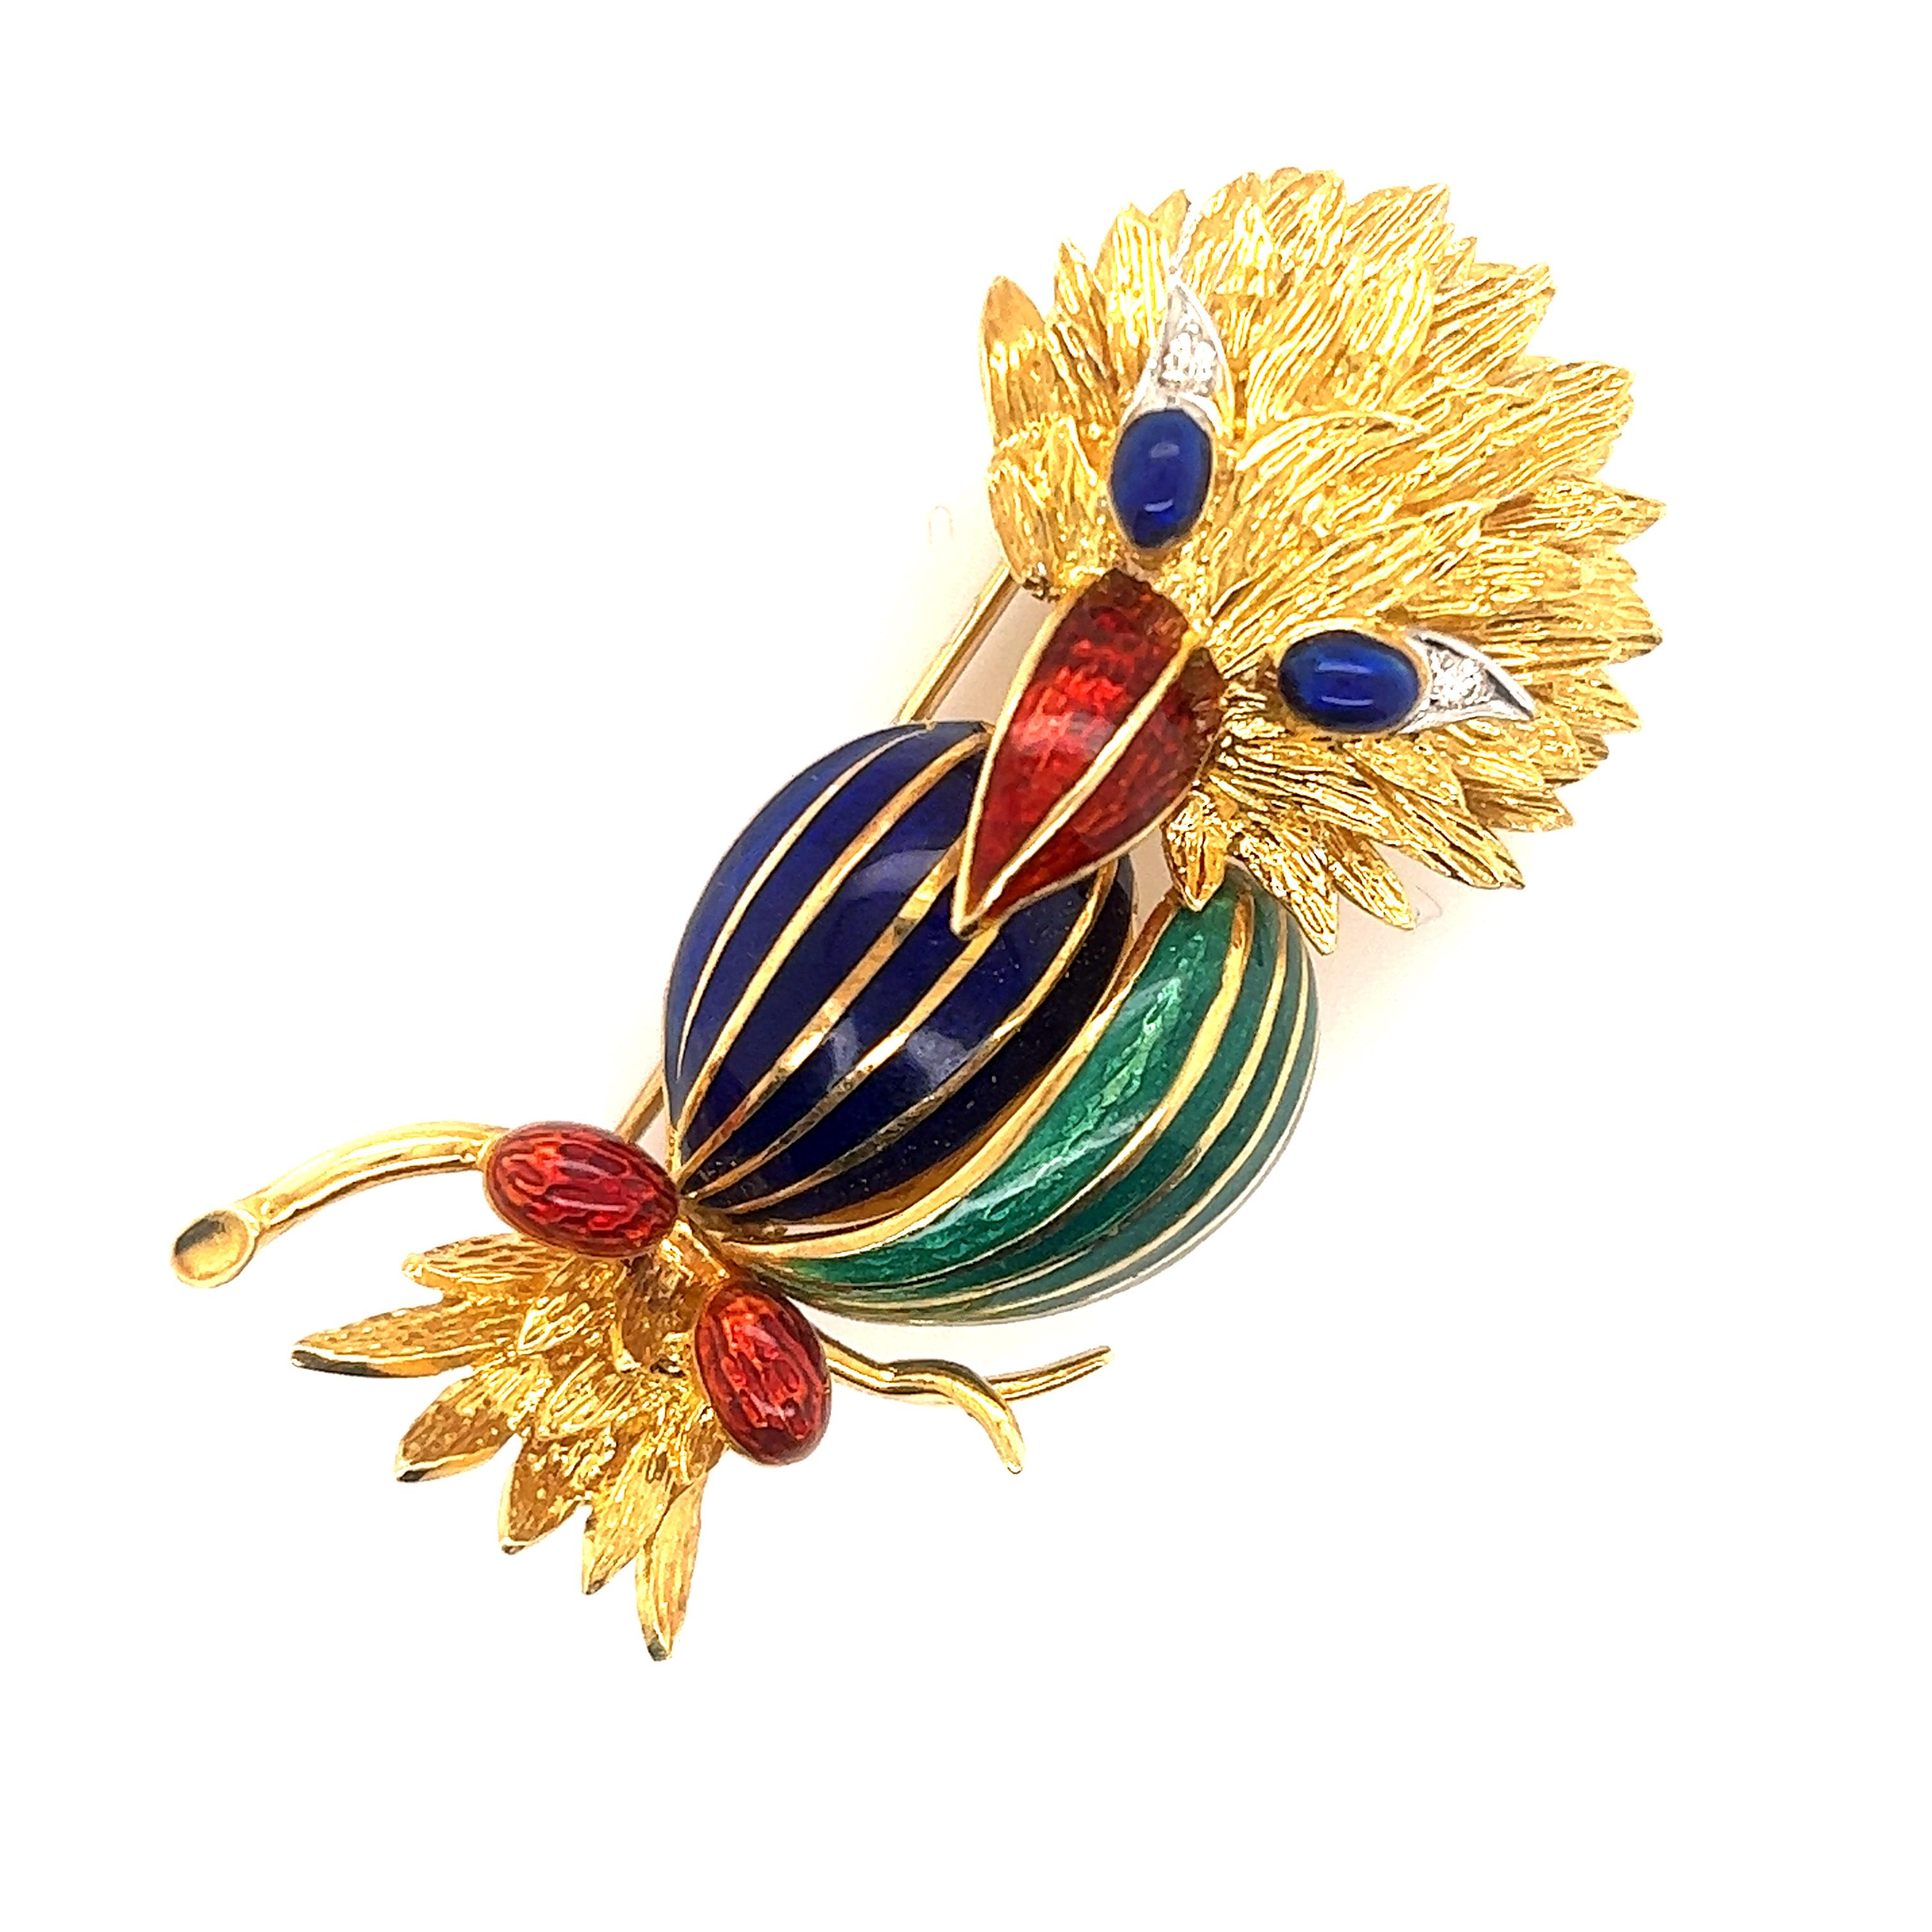 Fantastic design seen on this beautiful brooch. The brooch is crafted in the theme of a bird with details seen throughout. Vibrant shades of blue, green and red enamel decorate the bird. Diamond accents are seen in the eyes. The brooch is crafted in